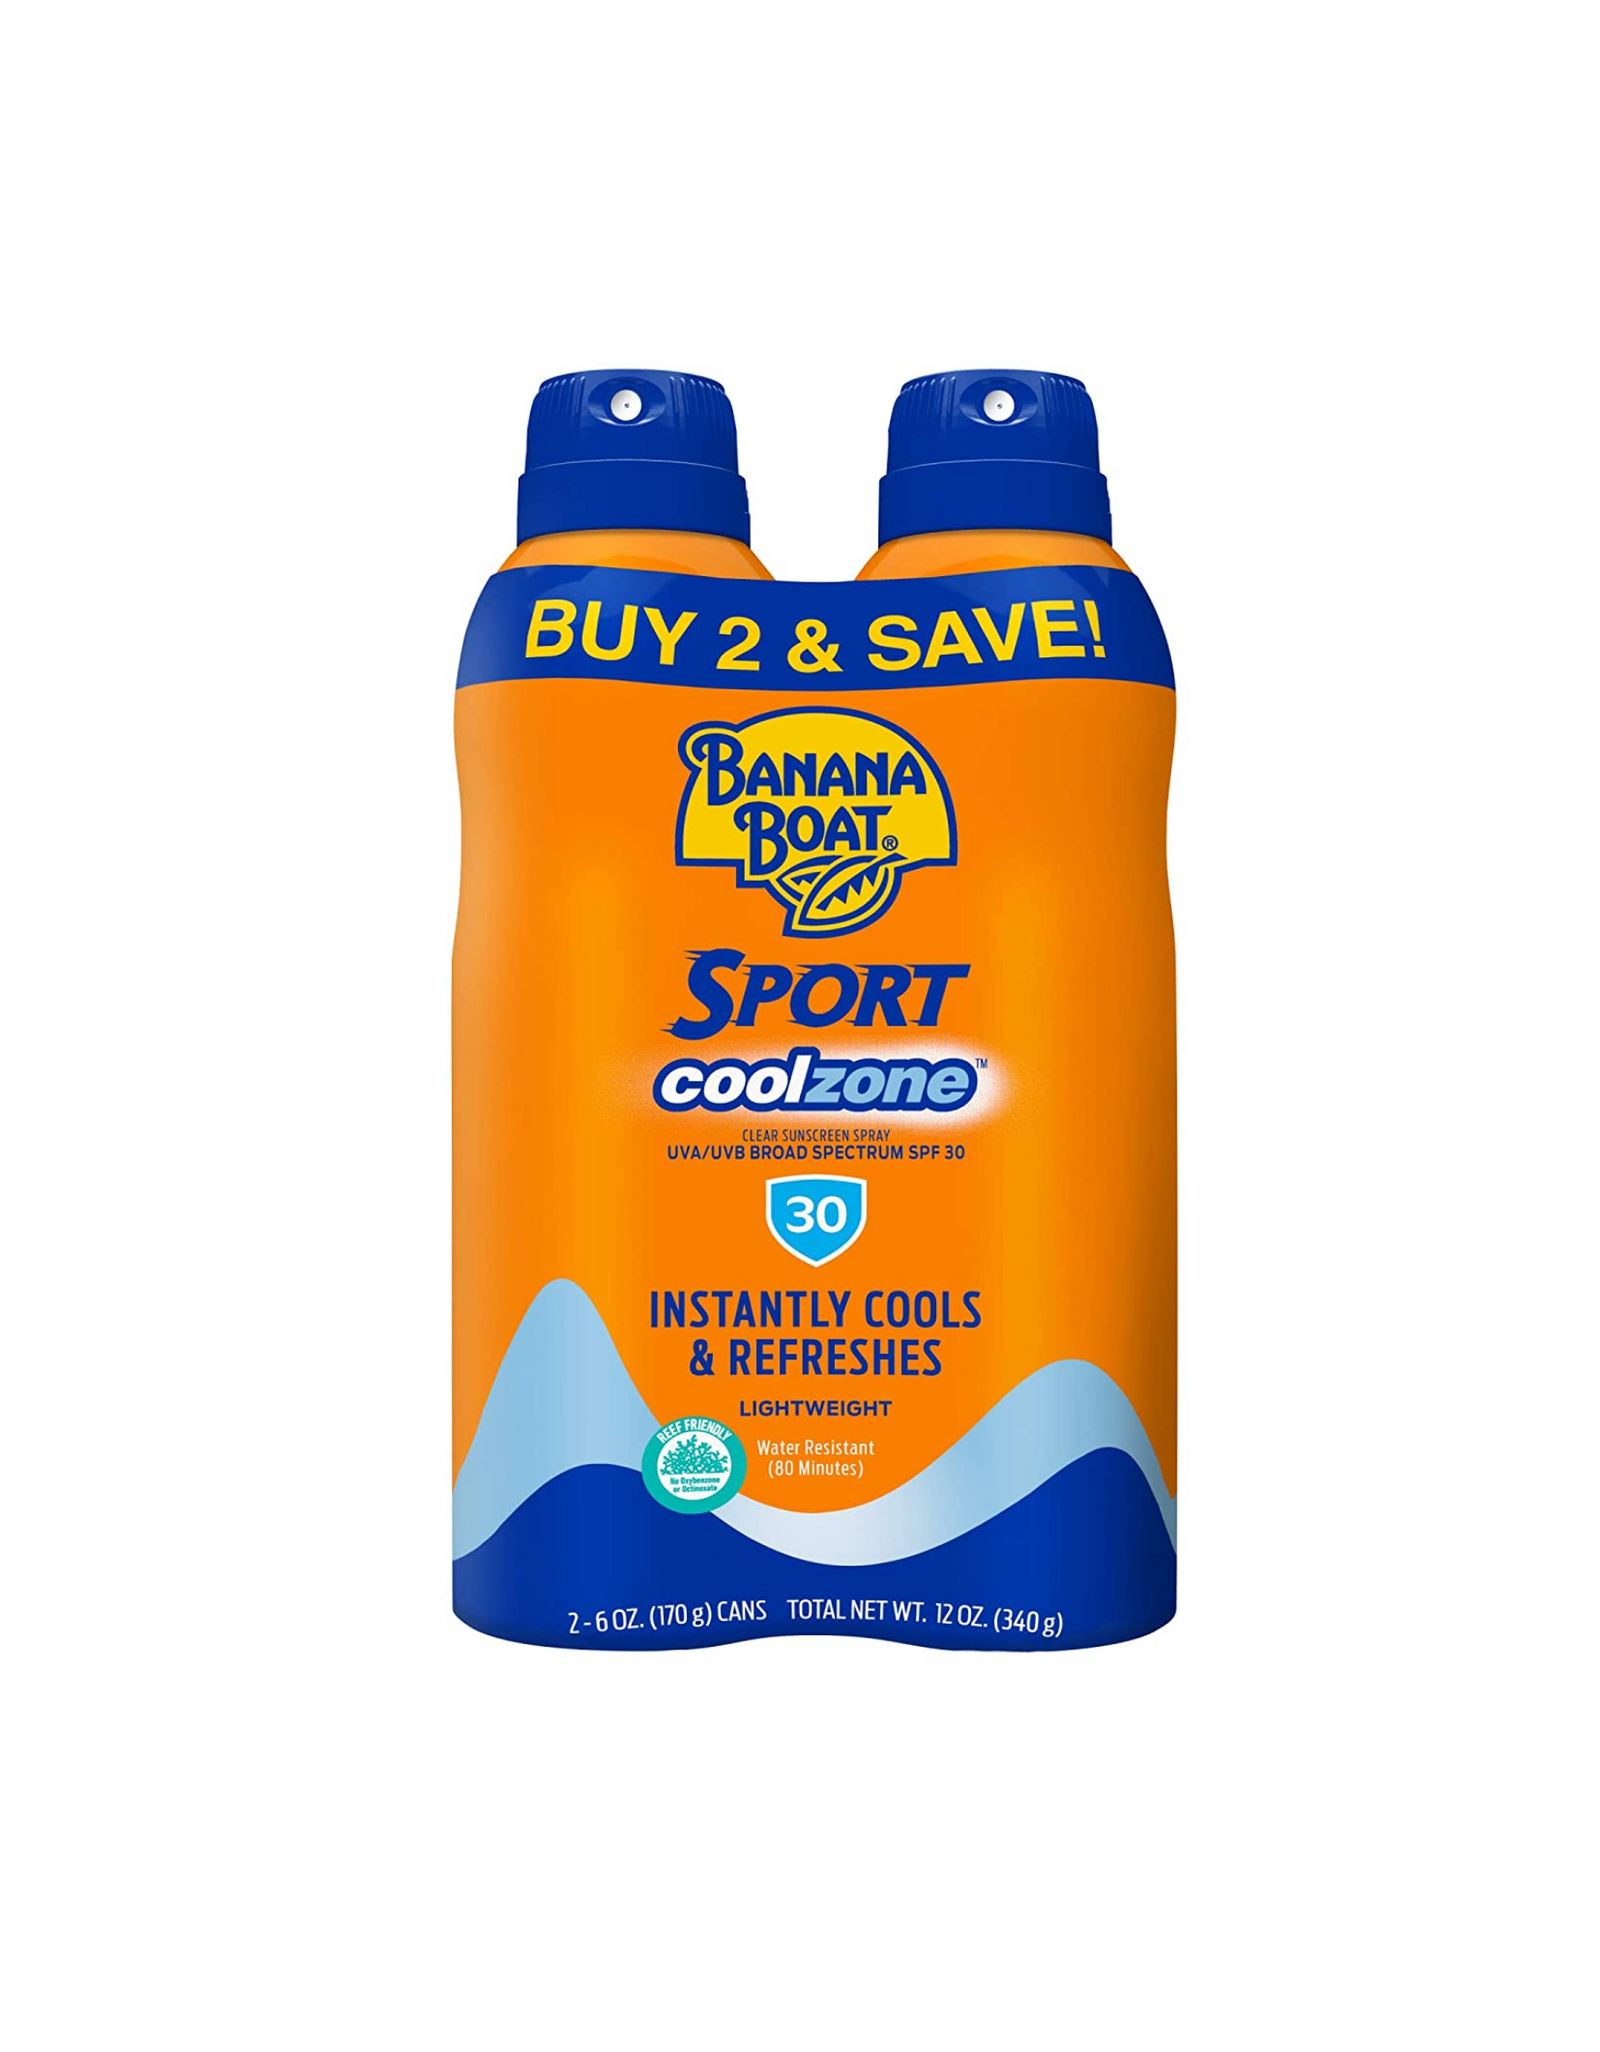 Banana Boat Sport Performance Cool Zone, Broad Spectrum SPF 30, 6 oz, Twin Pack